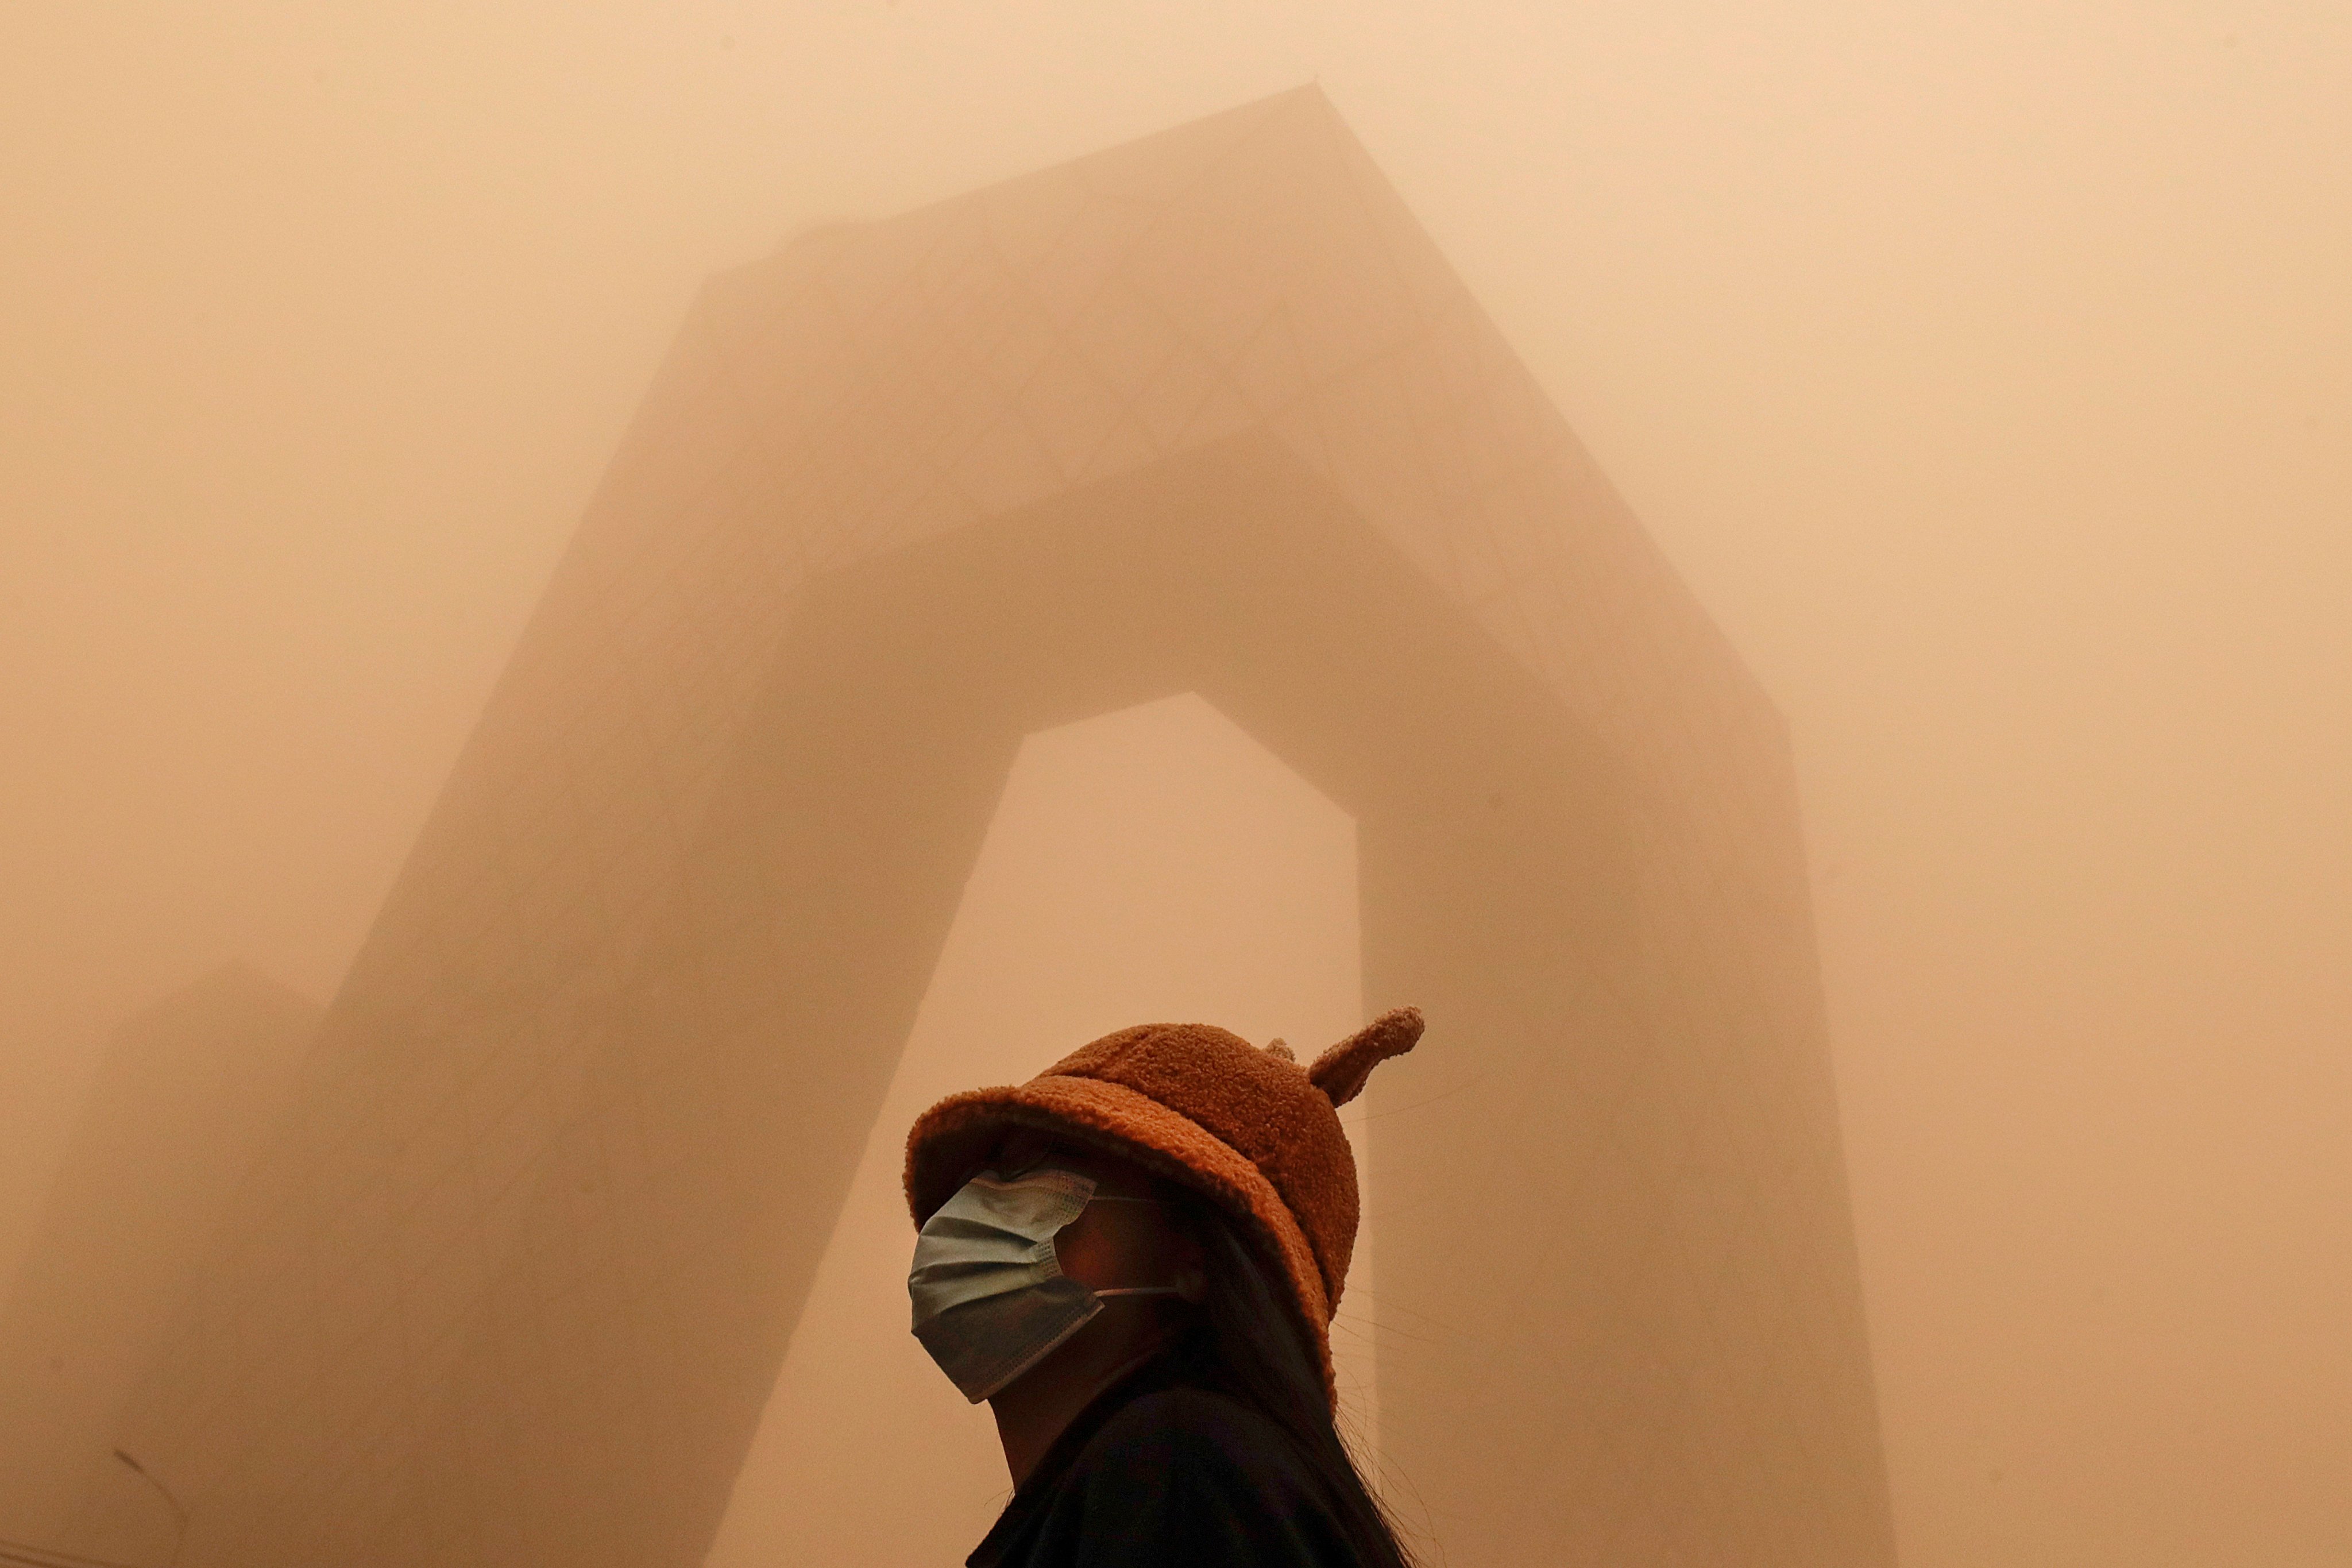 Chinese researchers have provided strong evidence of a causal link between air pollution and suicide rates, a study they hope sparks stronger environmental policies around the world. Photo: AP